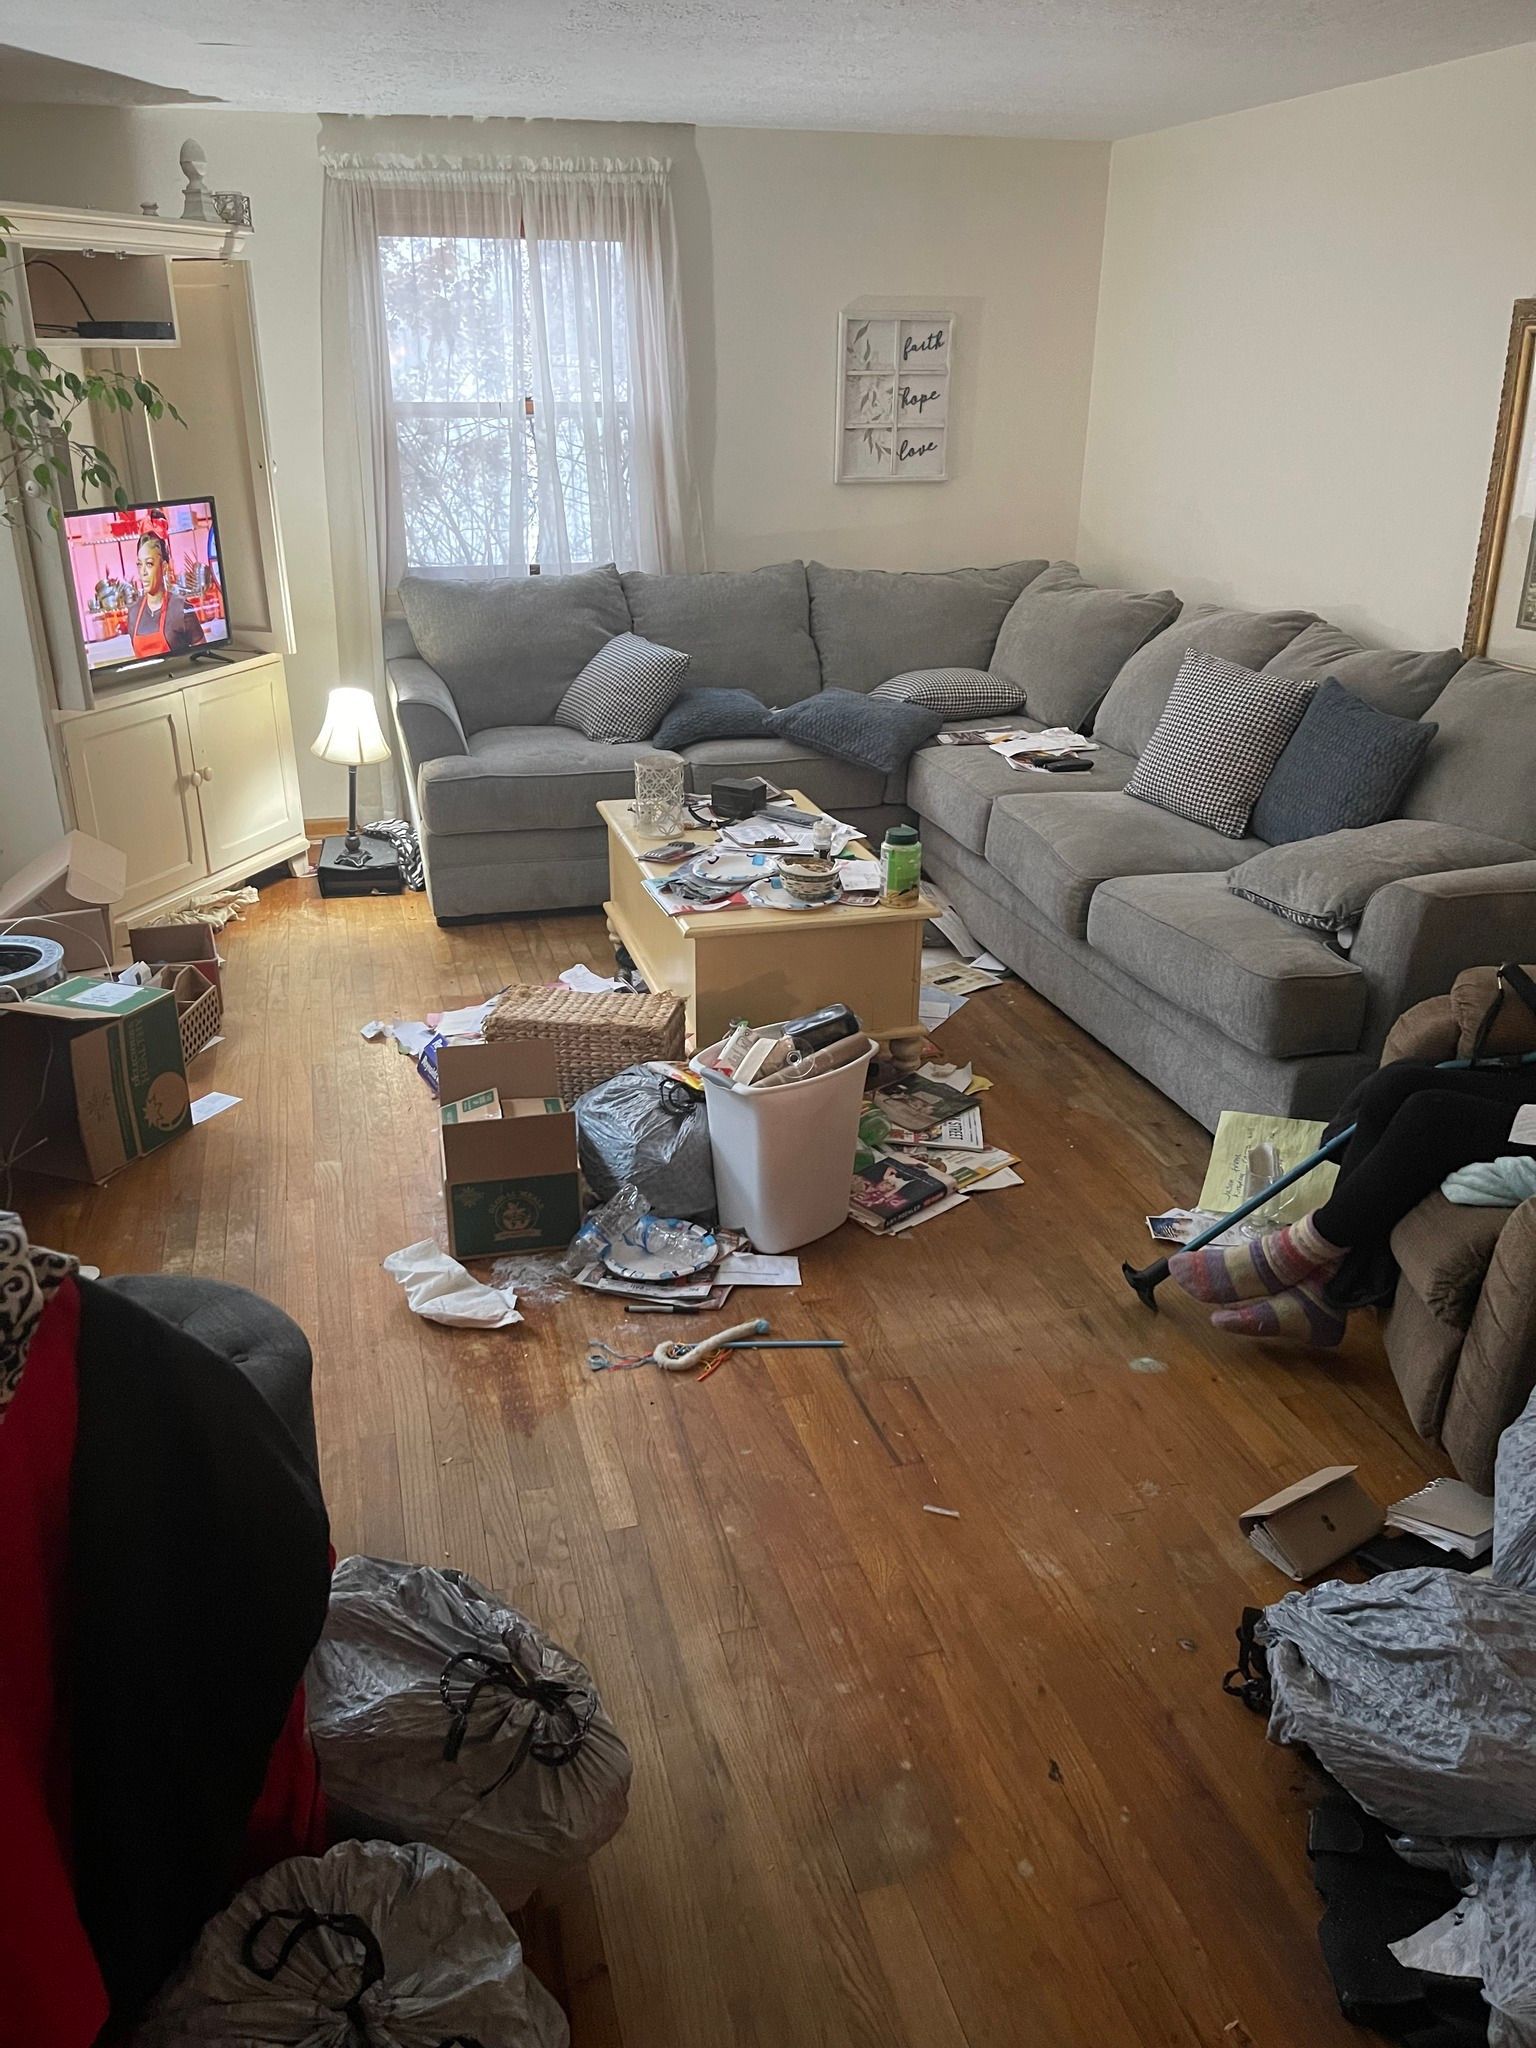 Before image of cluttered living room with scattered items and mess